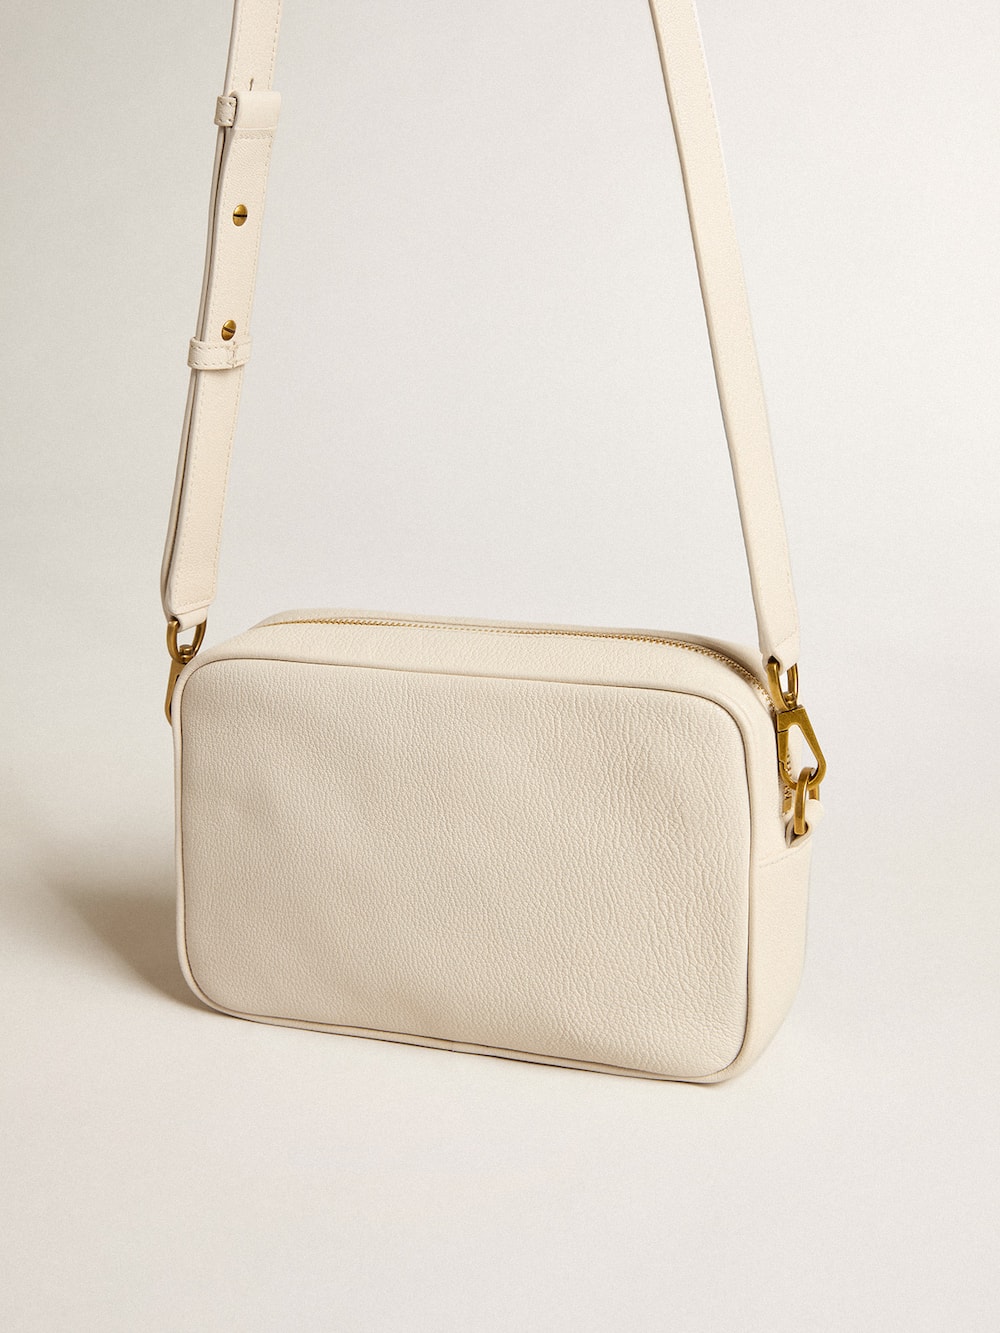 Golden Goose - Women’s Star Bag in butter-colored leather in 